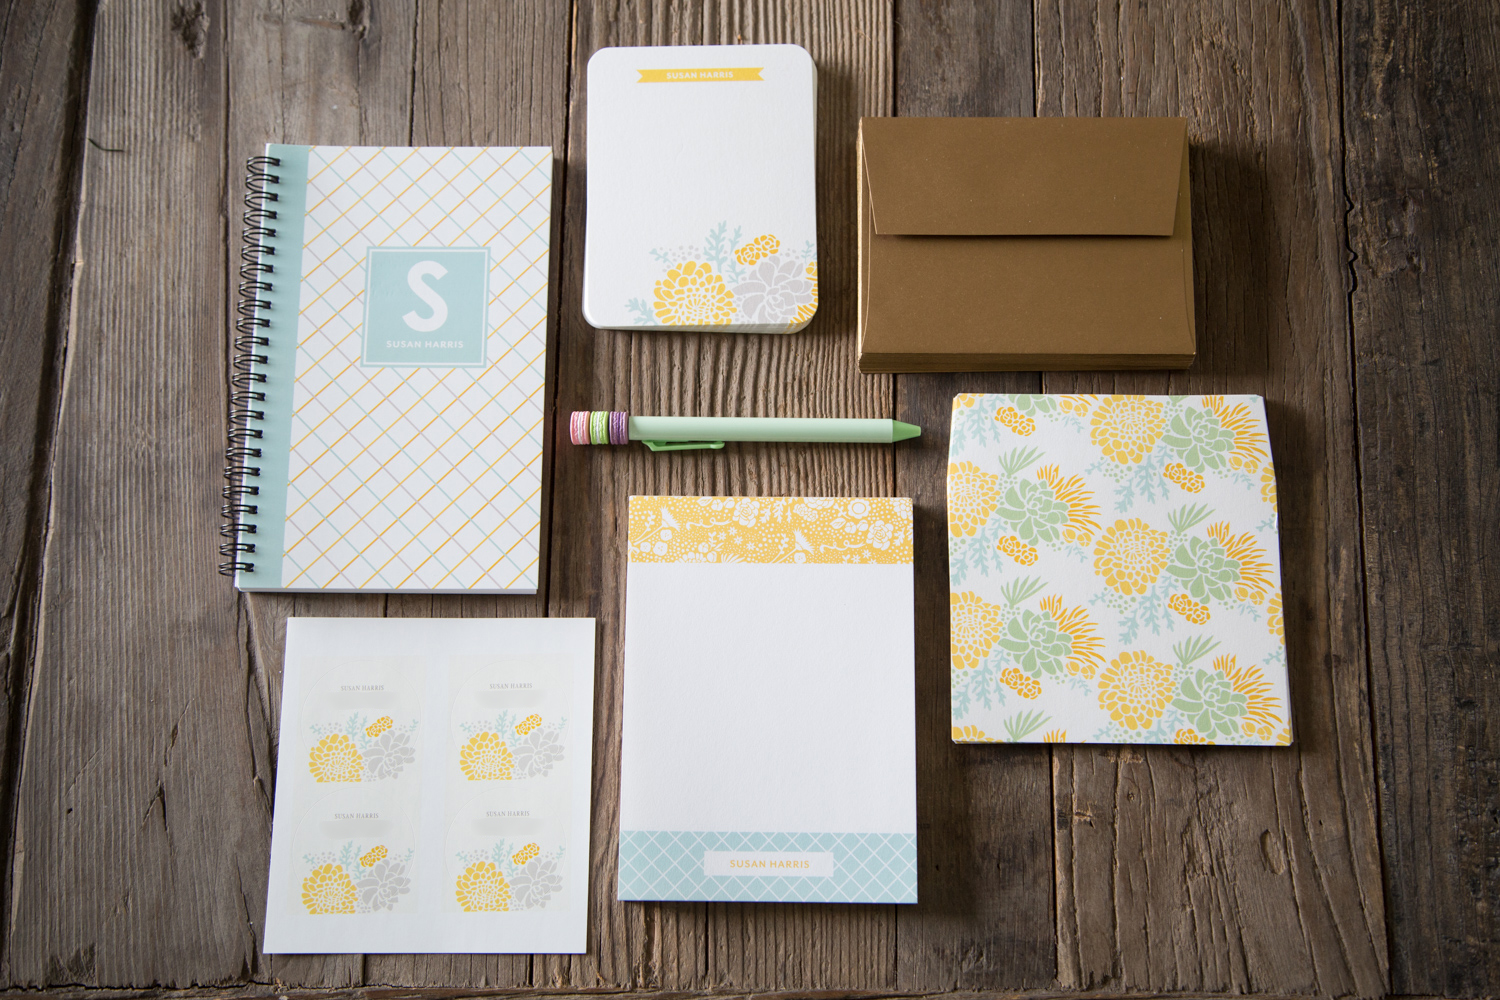 Personalized Stationary Set from Tiny Prints